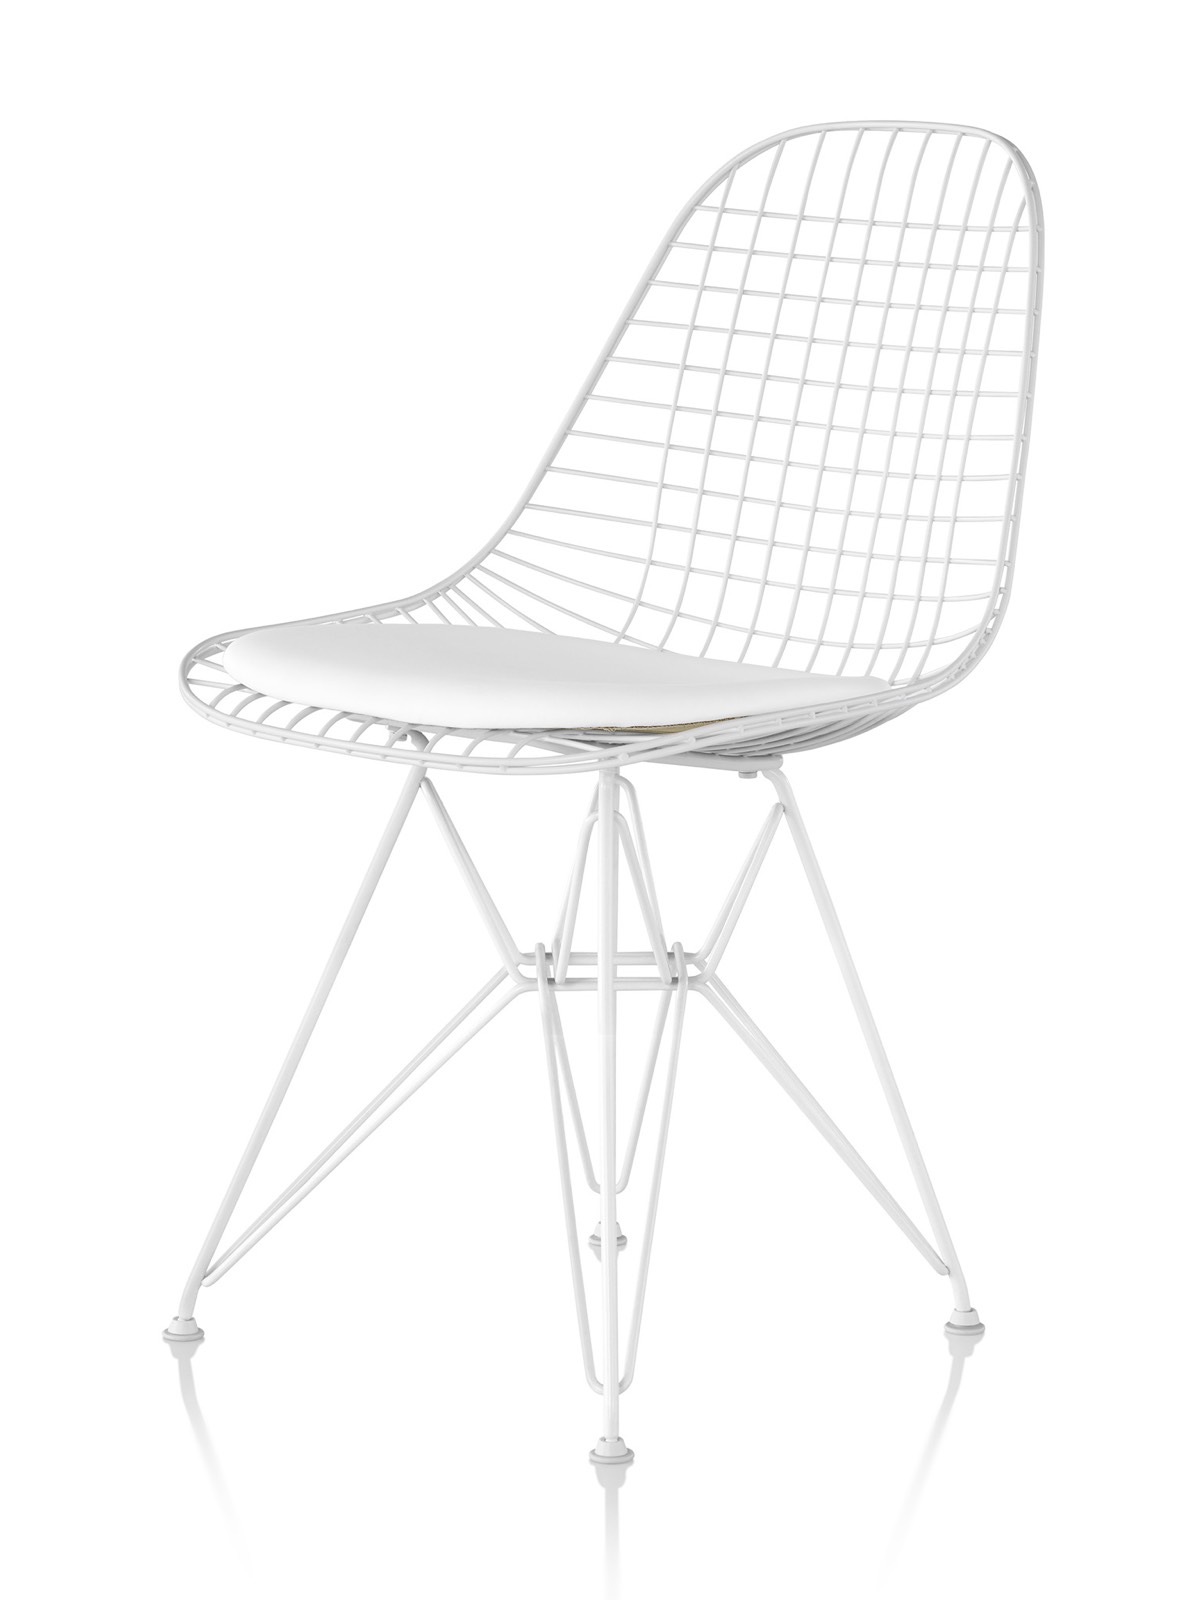 Eames Wire side chair with a wire base, viewed from a 45-degree angle.